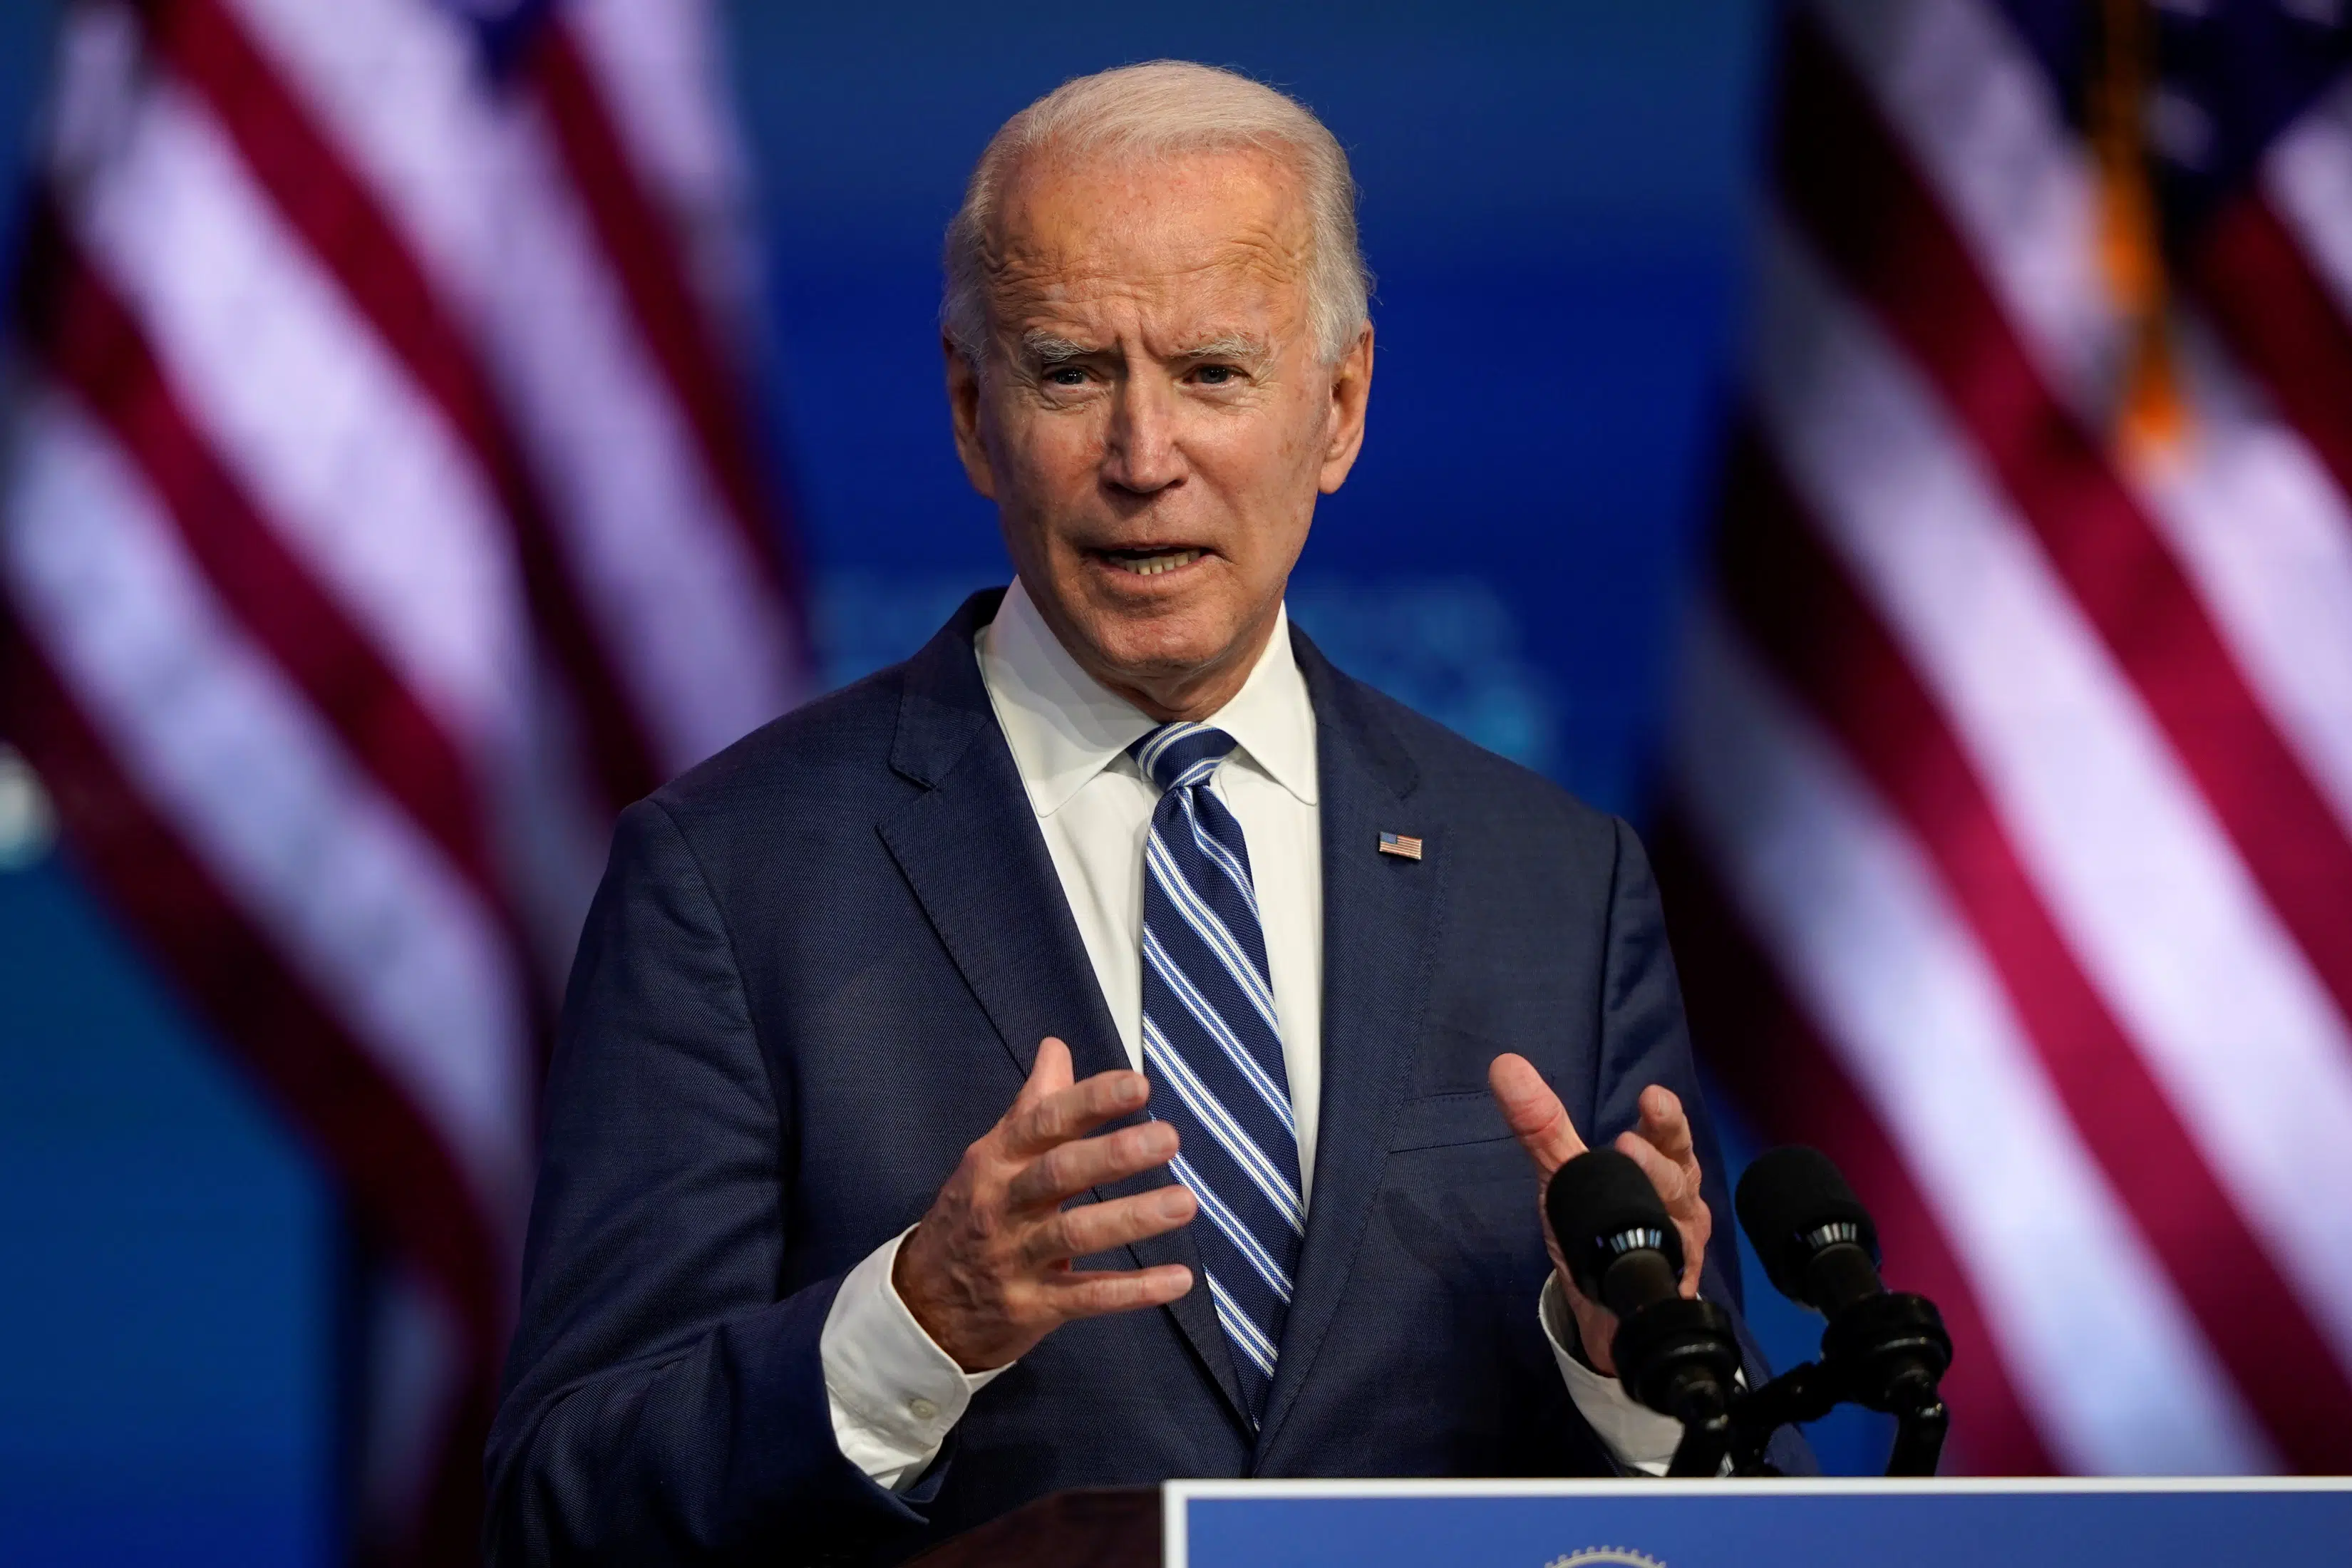 Biden’s First Official Trip Will Be to Wisconsin for CNN Town Hall